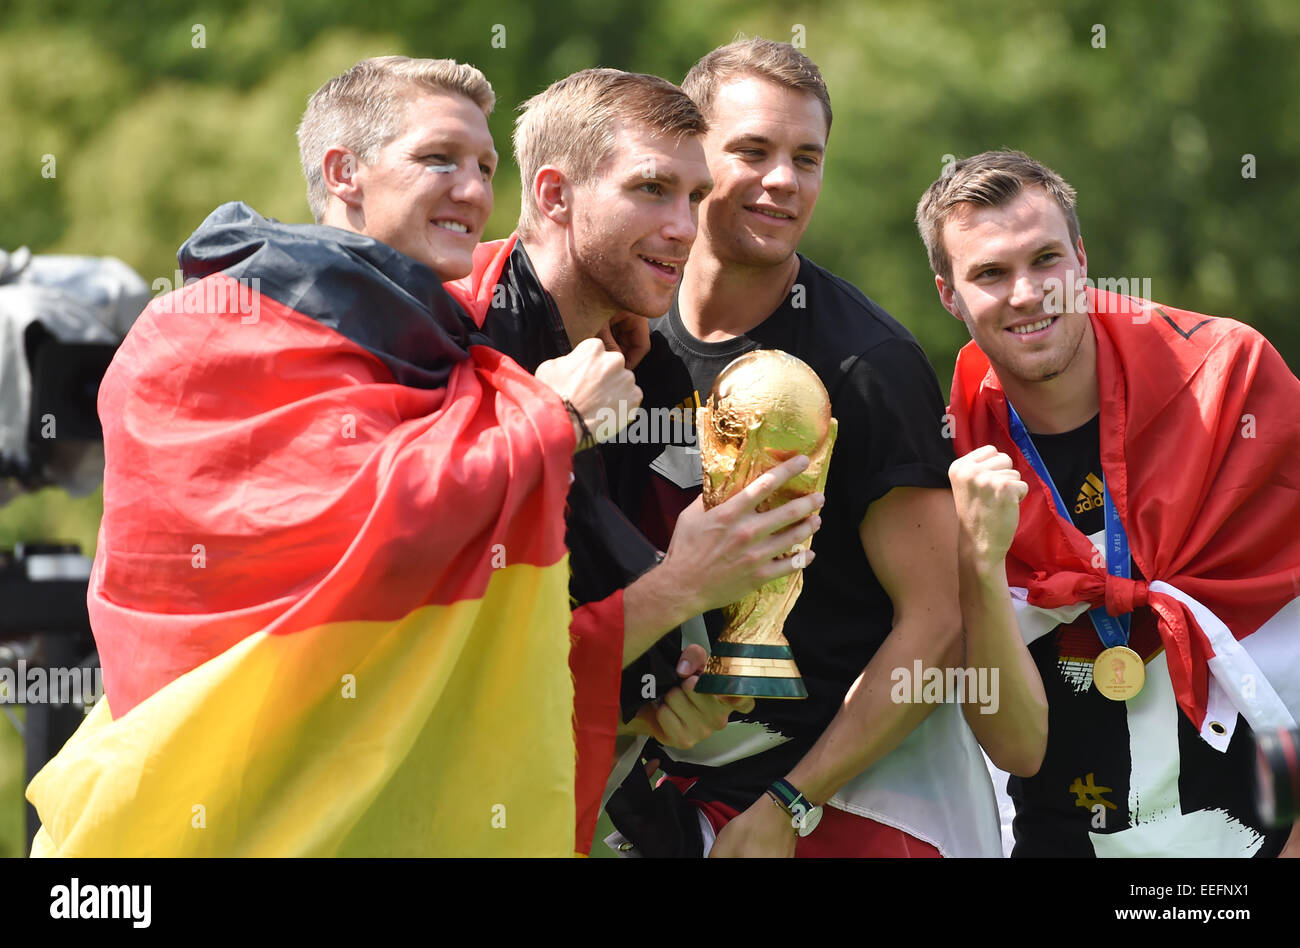 The Germany national football team celebrating their victory at Brandenburg Gate (Brandenburger Tor). 400,000 fans gathered at the so called Fanmeile to greet the winners of the 2014 World Cup.  Featuring: Bastian Schweinsteiger,Manuel Neuer,Kevin Großkre Stock Photo